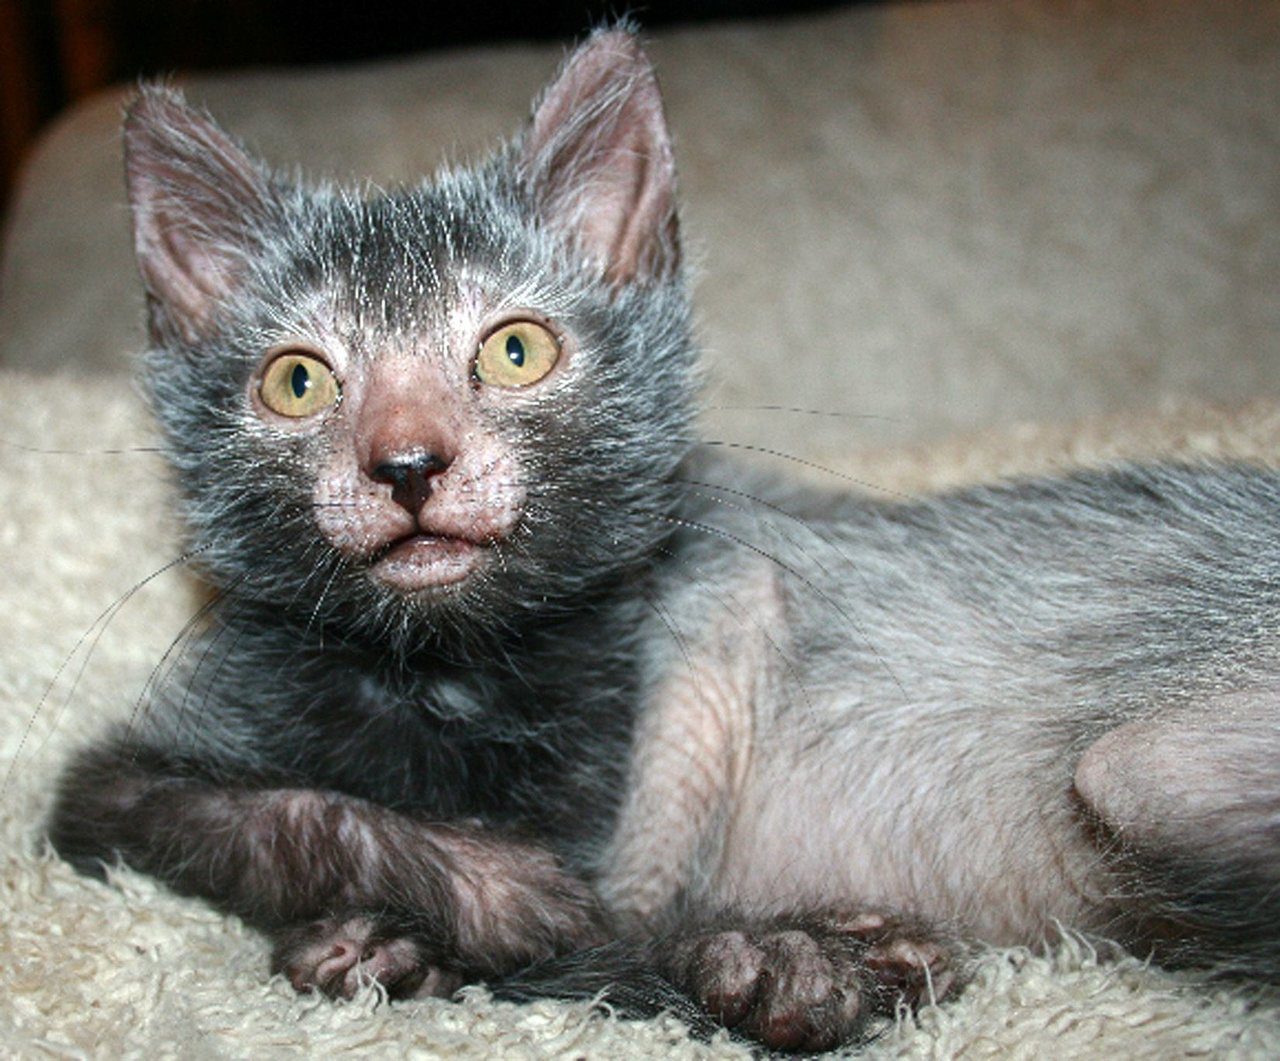 MANDATORY CREDIT: B. Gobble/Rex Features. Only for use in story about Lykoi cats. Editorial Use Only. No stock, books, advertising or merchandising without photographer's permission Mandatory Credit: Photo by B. Gobble/REX (3559622a) The Lykoi 'werewolf' cat The Lykoi 'werewolf' cat, Tennessee, America - 11 Feb 2014 FULL COPY: http://www.rexfeatures.com/nanolink/okqx Be prepared, the werewolf cat is about to rise up and take over the world - or is it a Wolverine imitator? A new breed of cat with a likeness to the mythical creatures is becoming the latest craze for pet owners. The Lykoi cat is a natural mutation from a domestic shorthair that, with no hair on its face, has the appearance of a horror movie character. It is now being championed by a group of breeders spearheaded by Tennessee-based Lykoi specialist Johnny Gobble and his family. Mr Gobble says Lykois began as a mix of a natural occurring Sphynx cat mutation and a black domestic shorthair, with the first litter being born in July 2010. He explains: The mutation has occurred in other cats, but to date, no reports of anyone starting a breed have been made. VIDEO: http://www.youtube.com/watch?v=jW6fzdWX-Kw